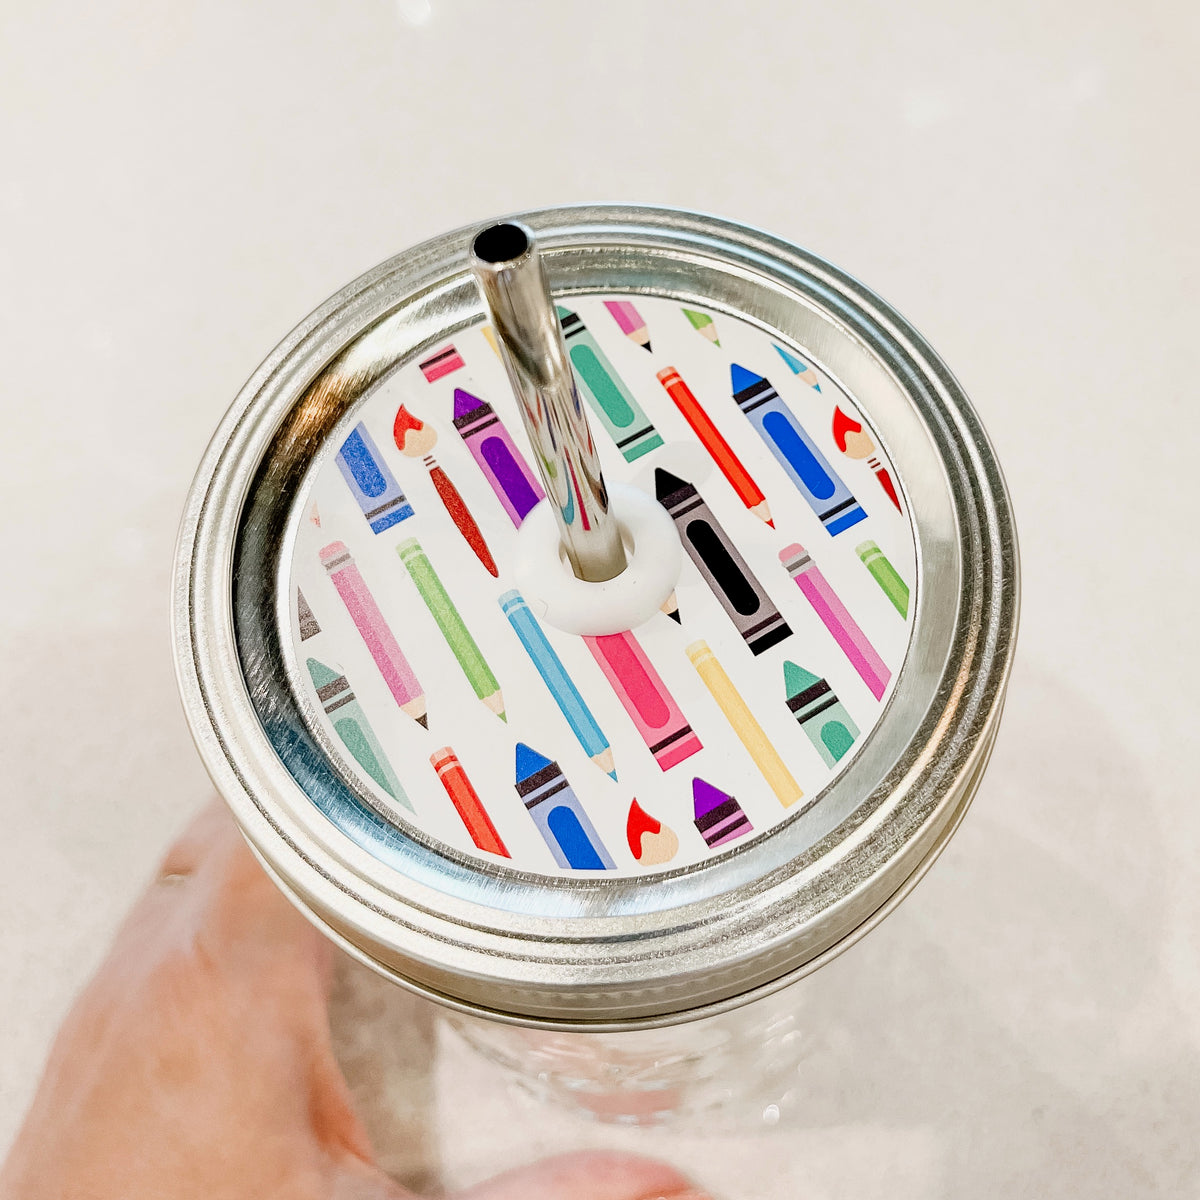 A Patterned Mason Jar Straw Lid with Colourful Pencils &amp; Crayons design